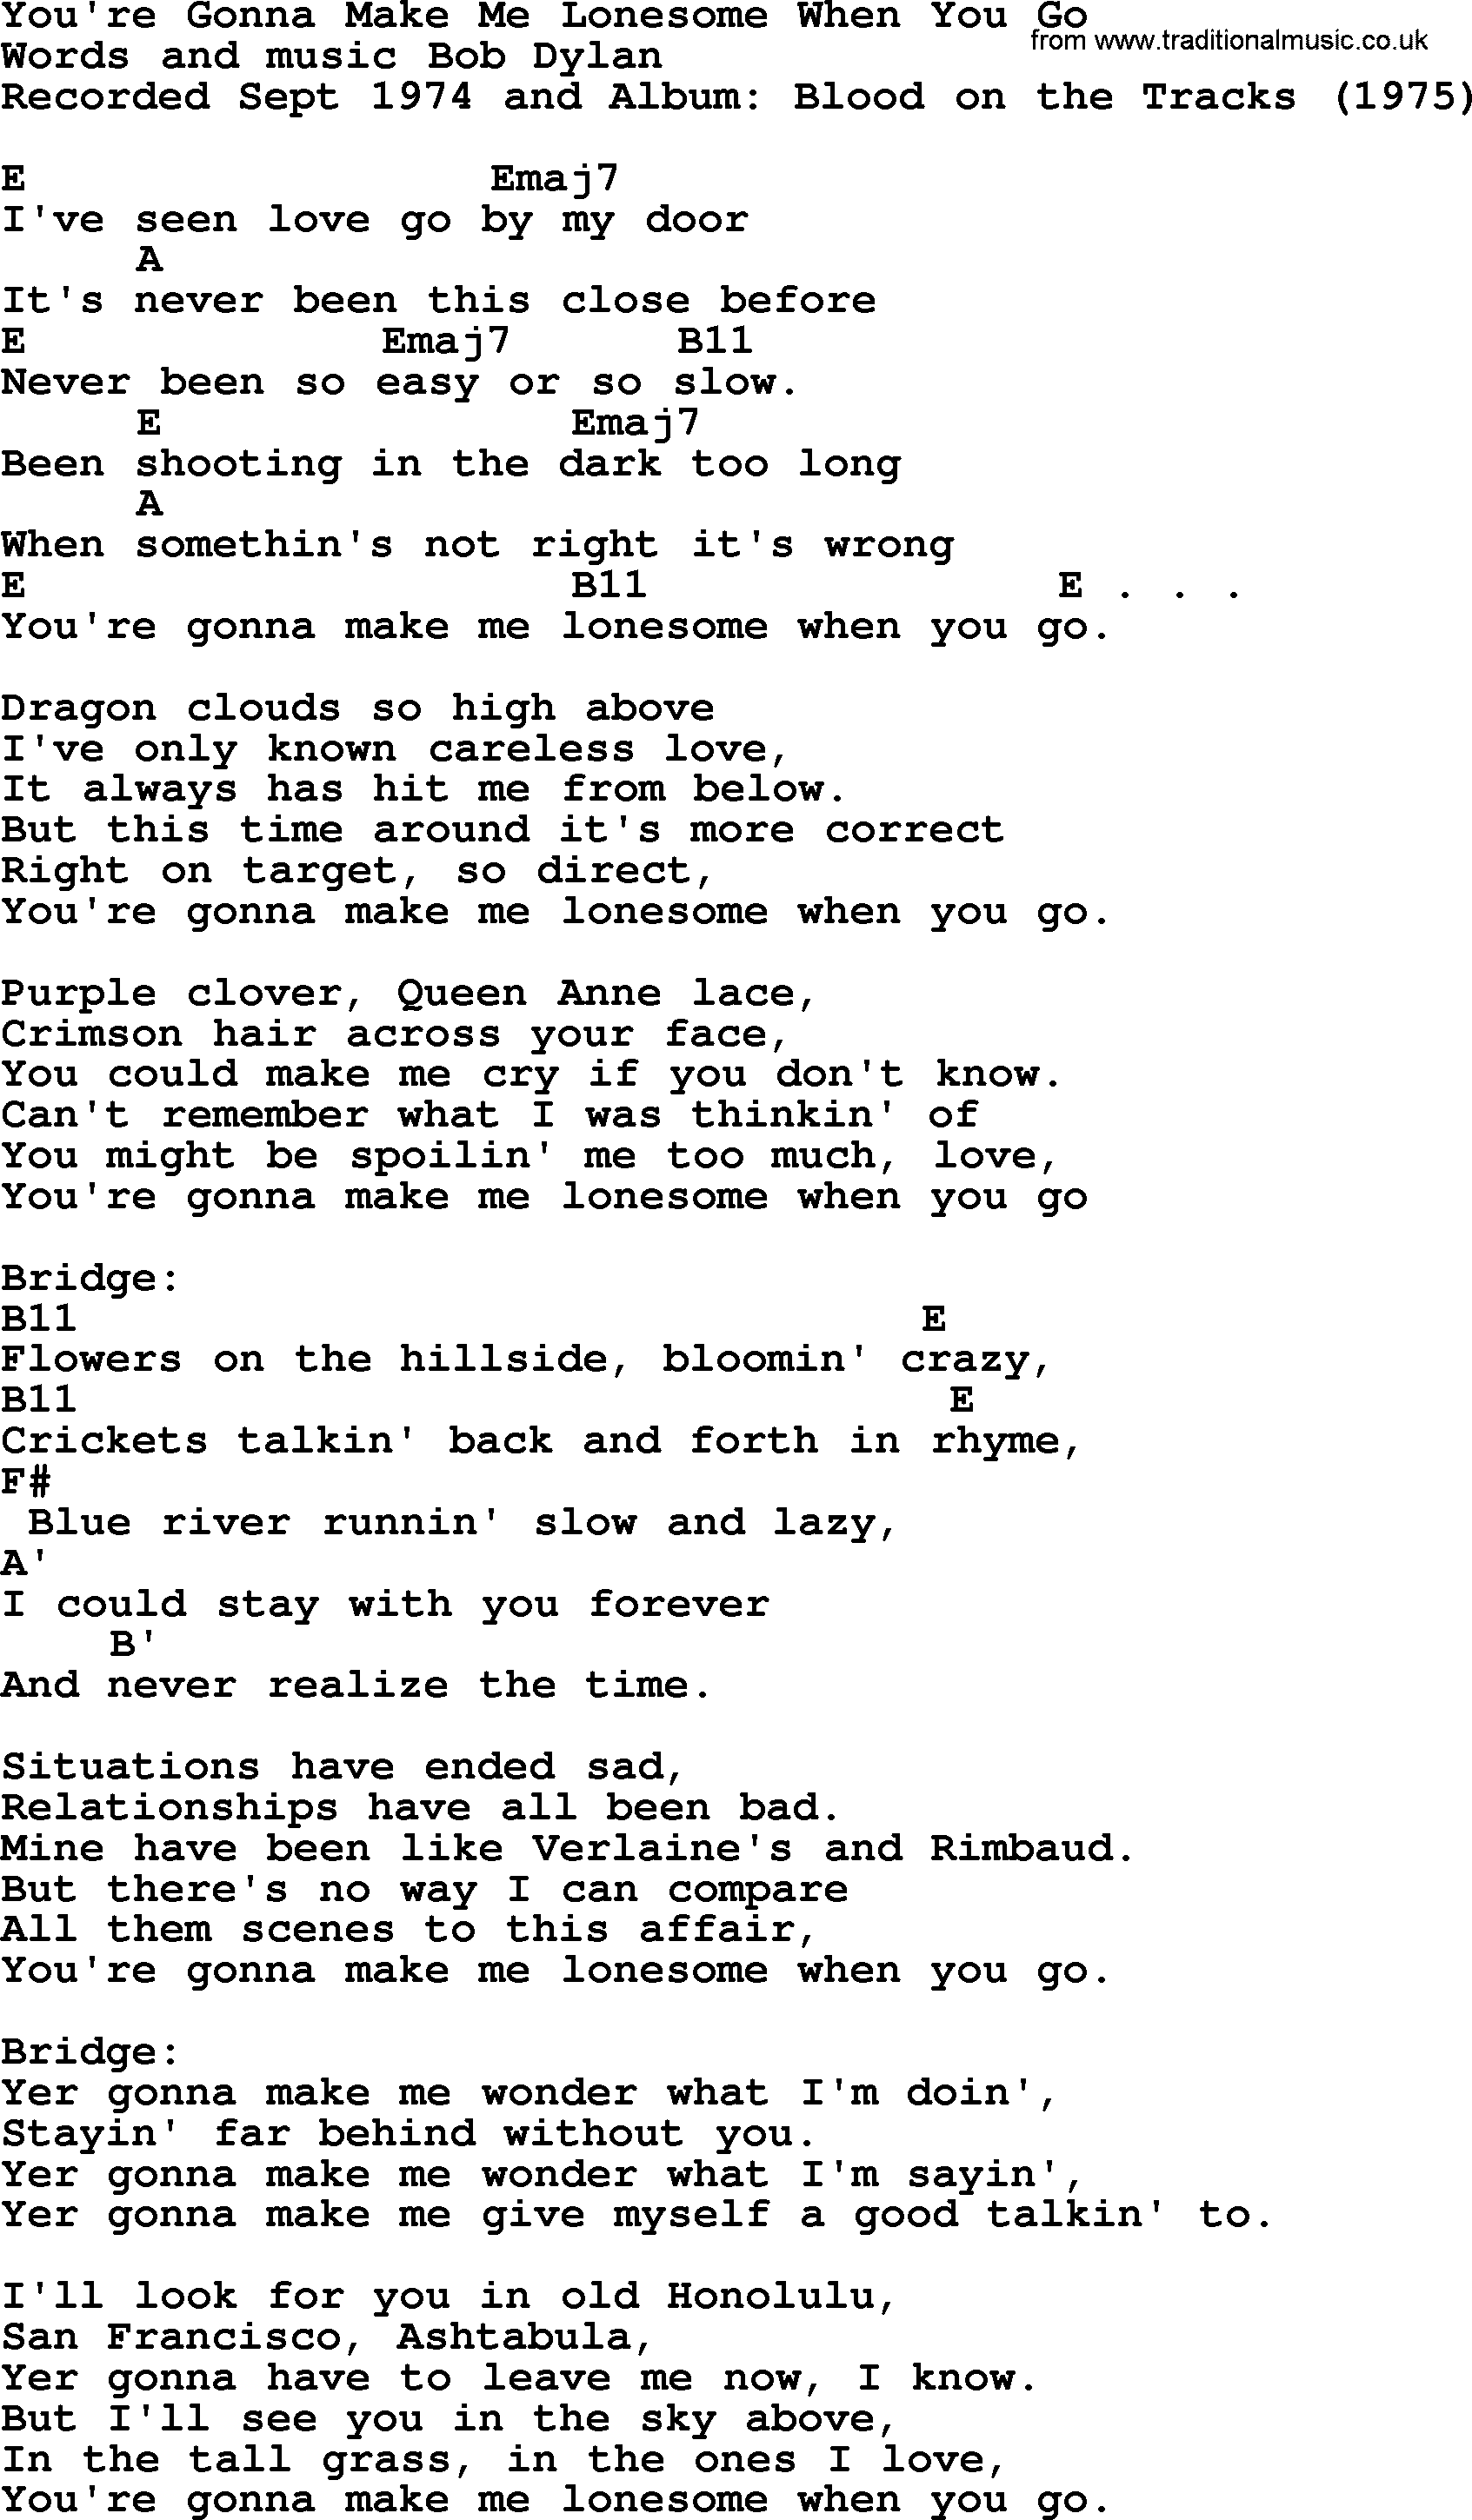 Bob Dylan song, lyrics with chords - You're Gonna Make Me Lonesome When You Go